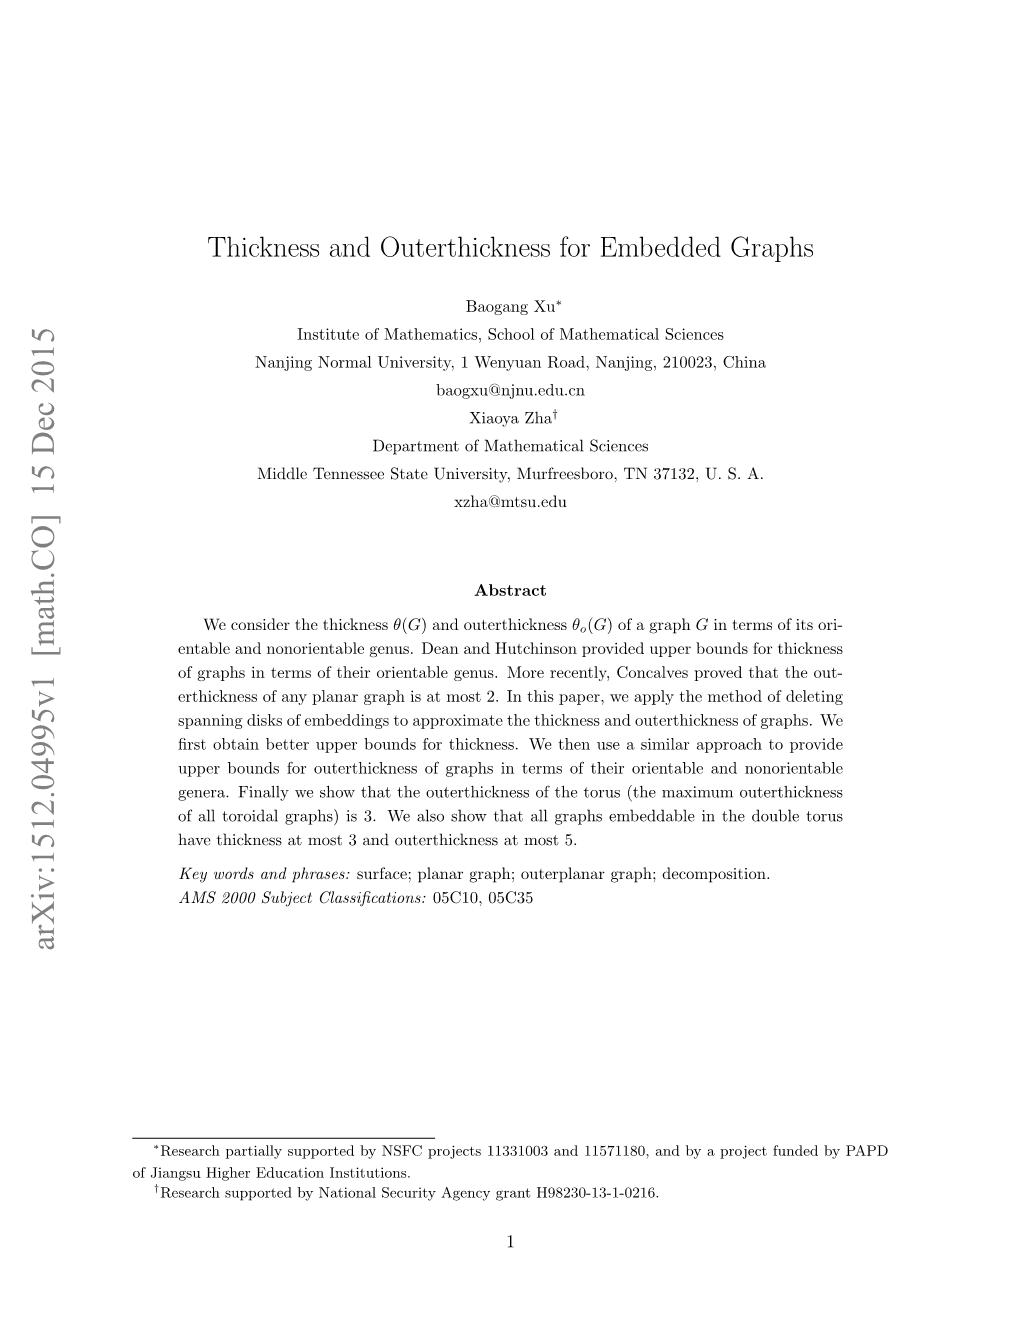 Thickness and Outerthickness for Embedded Graphs